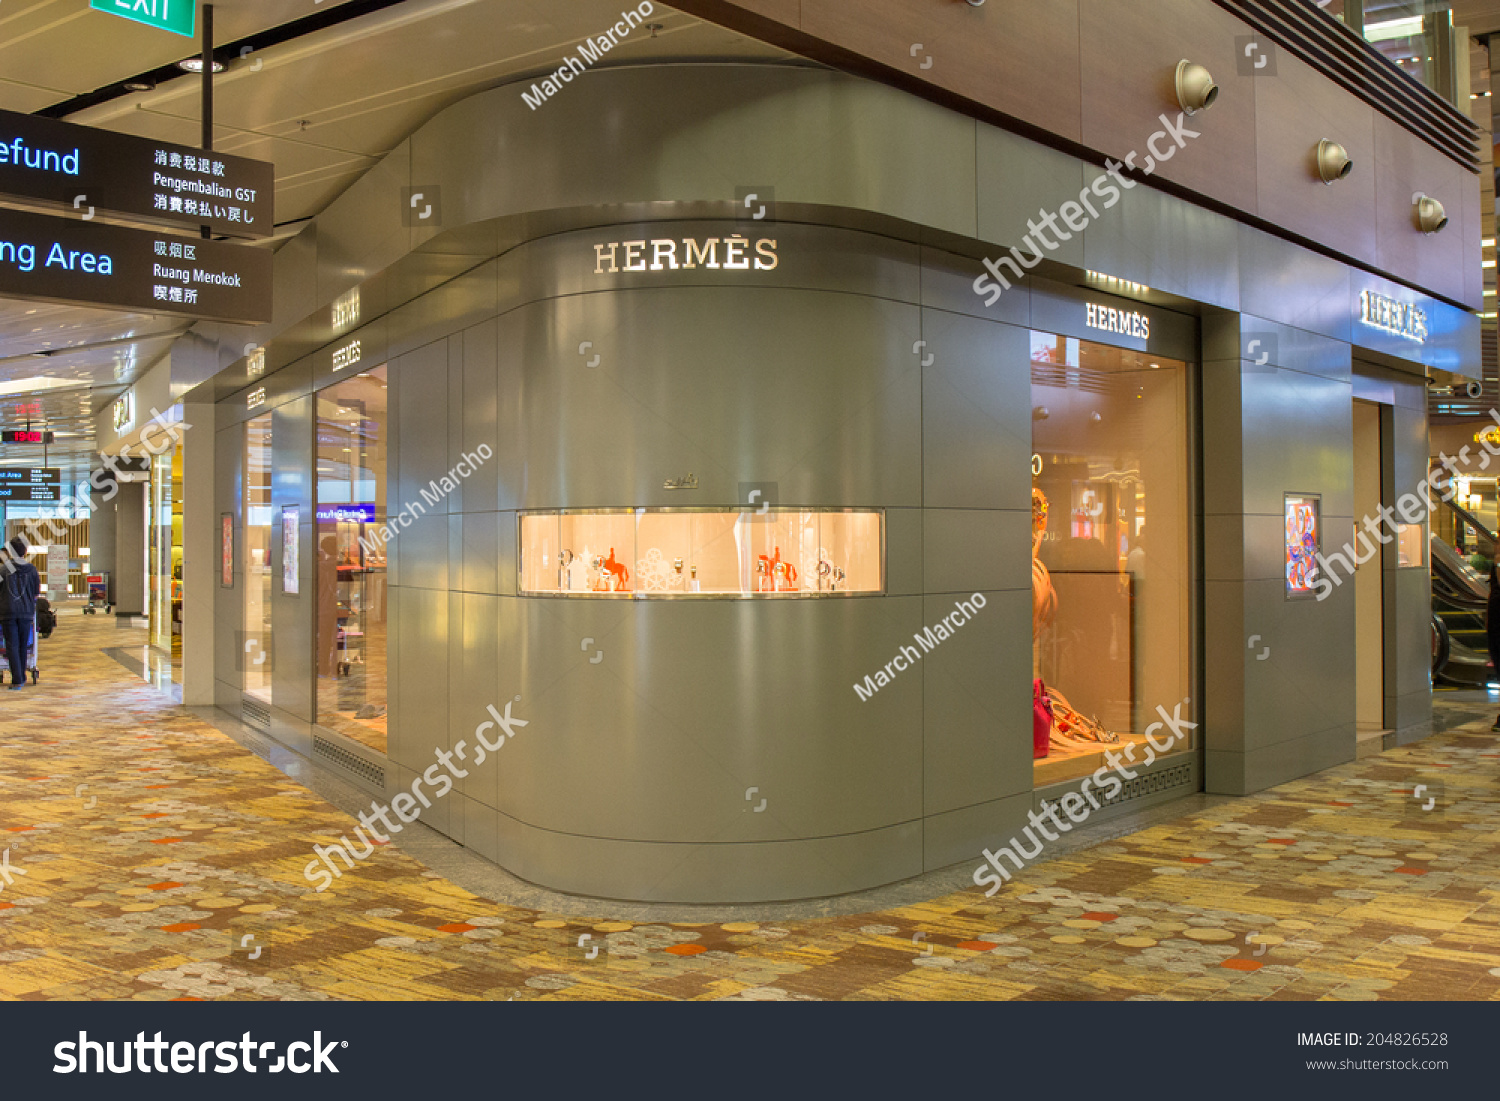 Singapore - June 20: Hermes Store In Changi Airport, Singapore On ...